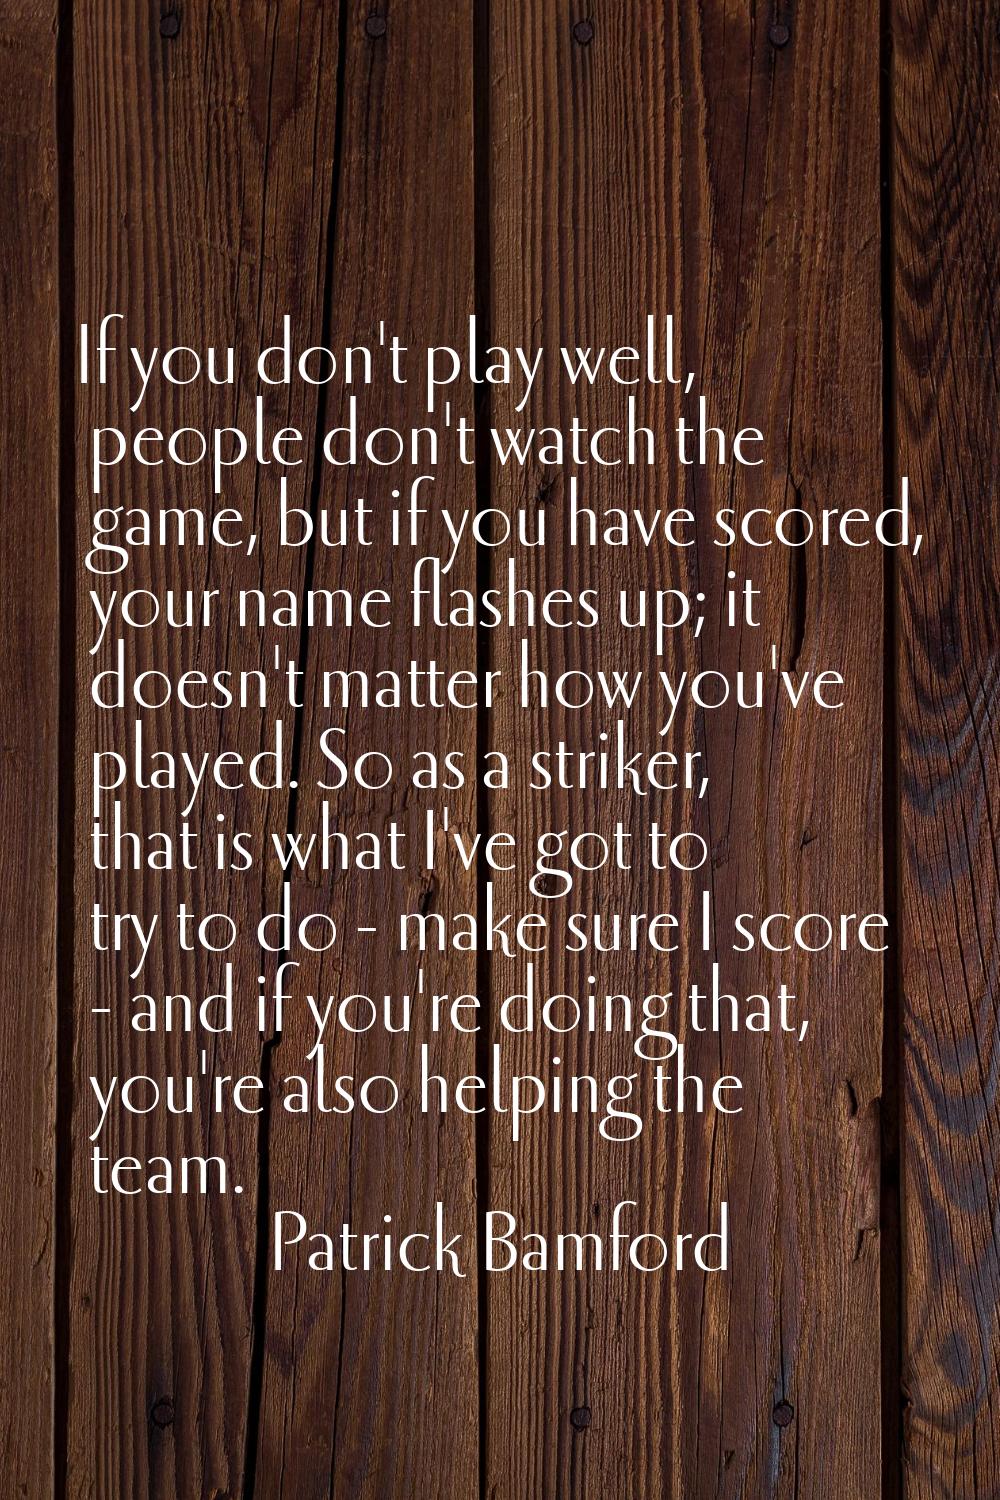 If you don't play well, people don't watch the game, but if you have scored, your name flashes up; 